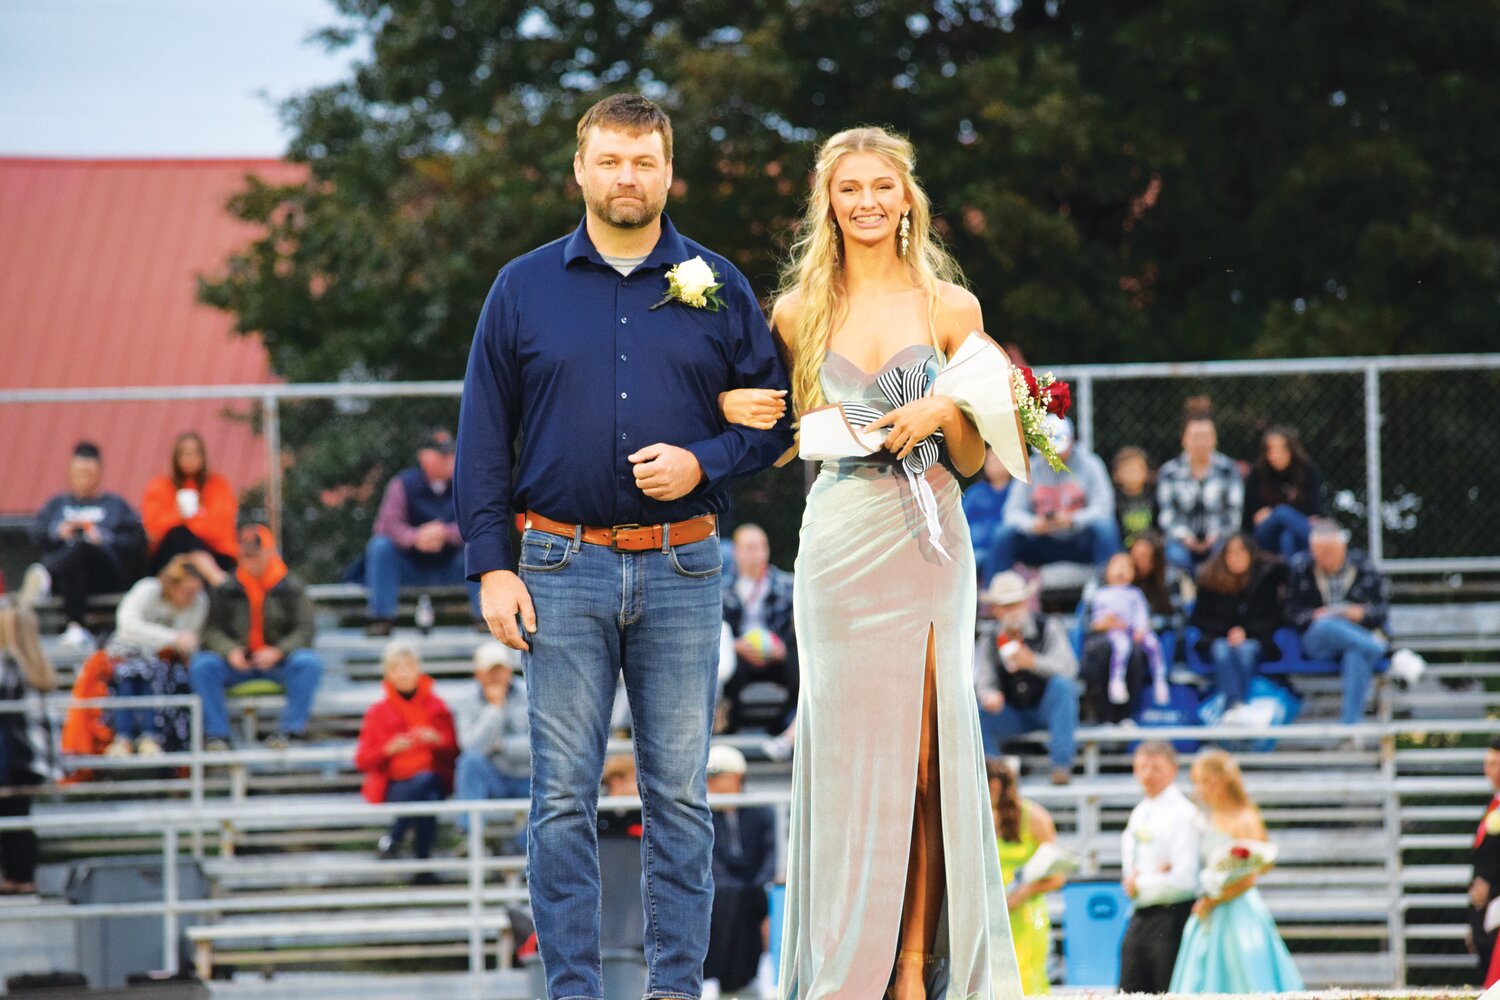 Junior Maid, Lakelynn Greenfield, was escorted by her father, Beau Greenfield.